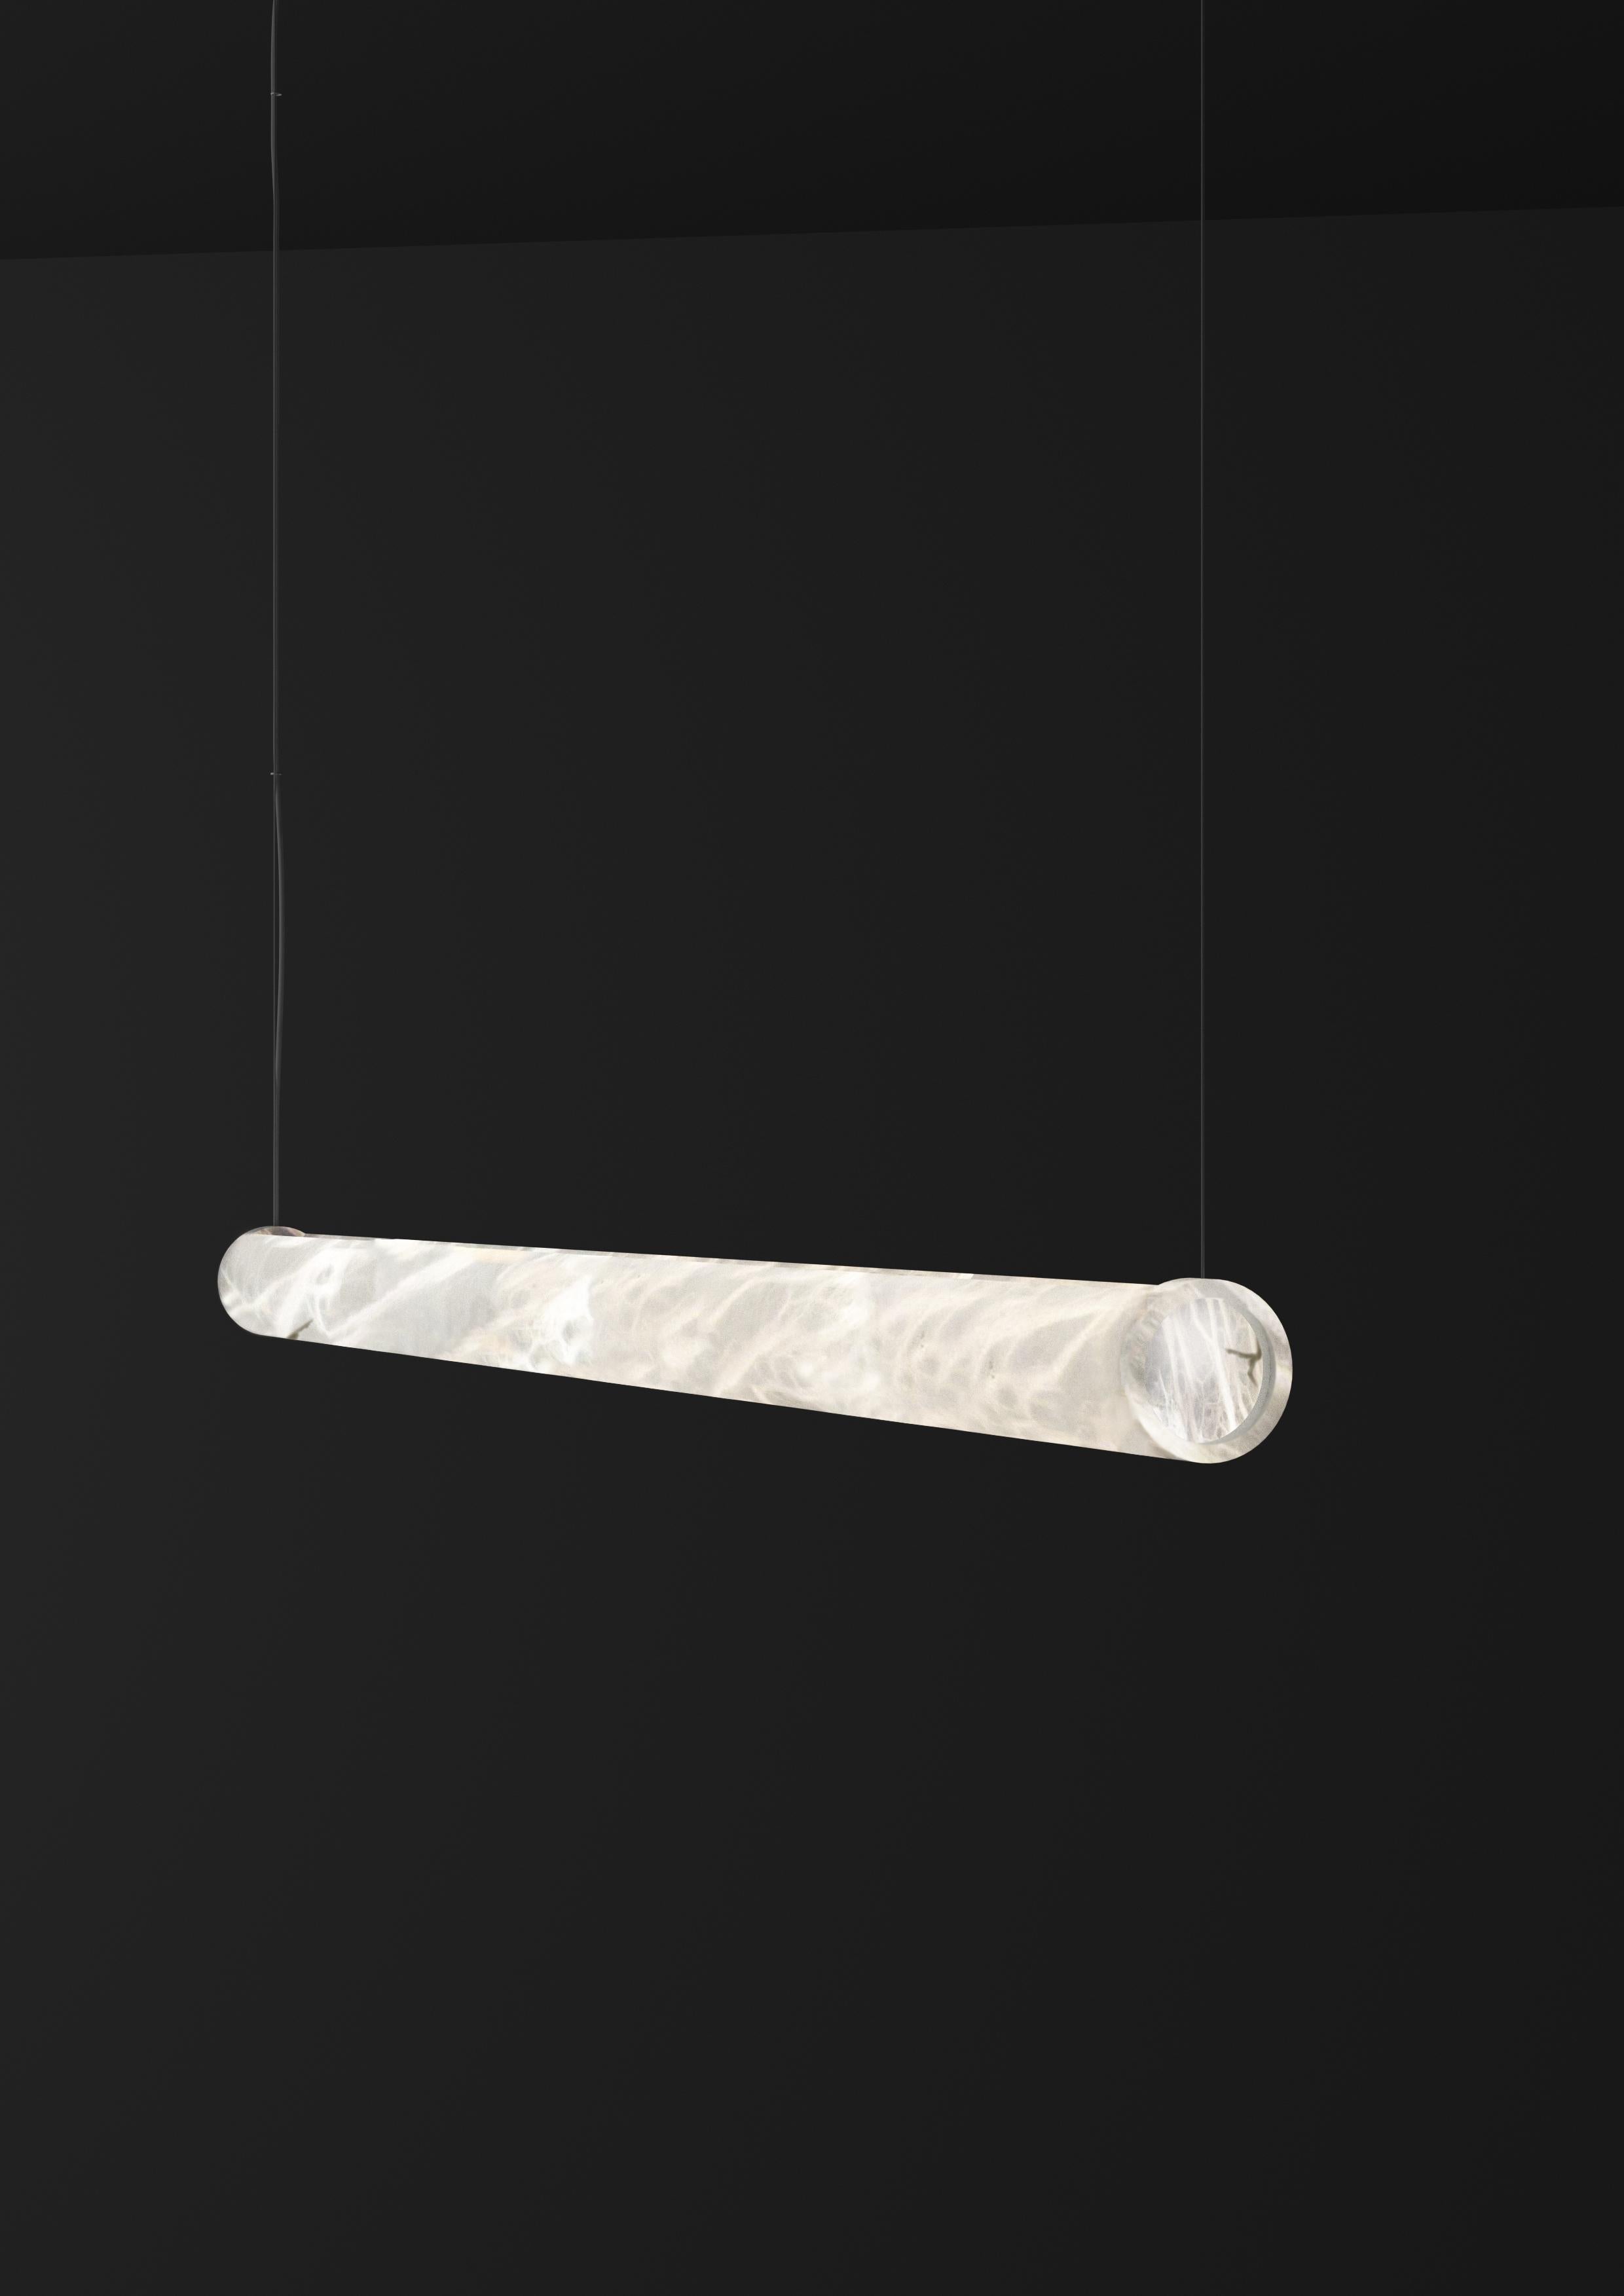 Ade L 1200 Pendant Lamp by Alabastro Italiano
Dimensions: D 8 x W 120 x H 8 cm.
Materials: White alabaster and metal.

Available in different finishes: Shiny Silver, Bronze, Brushed Brass, Ruggine of Florence, Brushed Burnished, Shiny Gold, Brushed